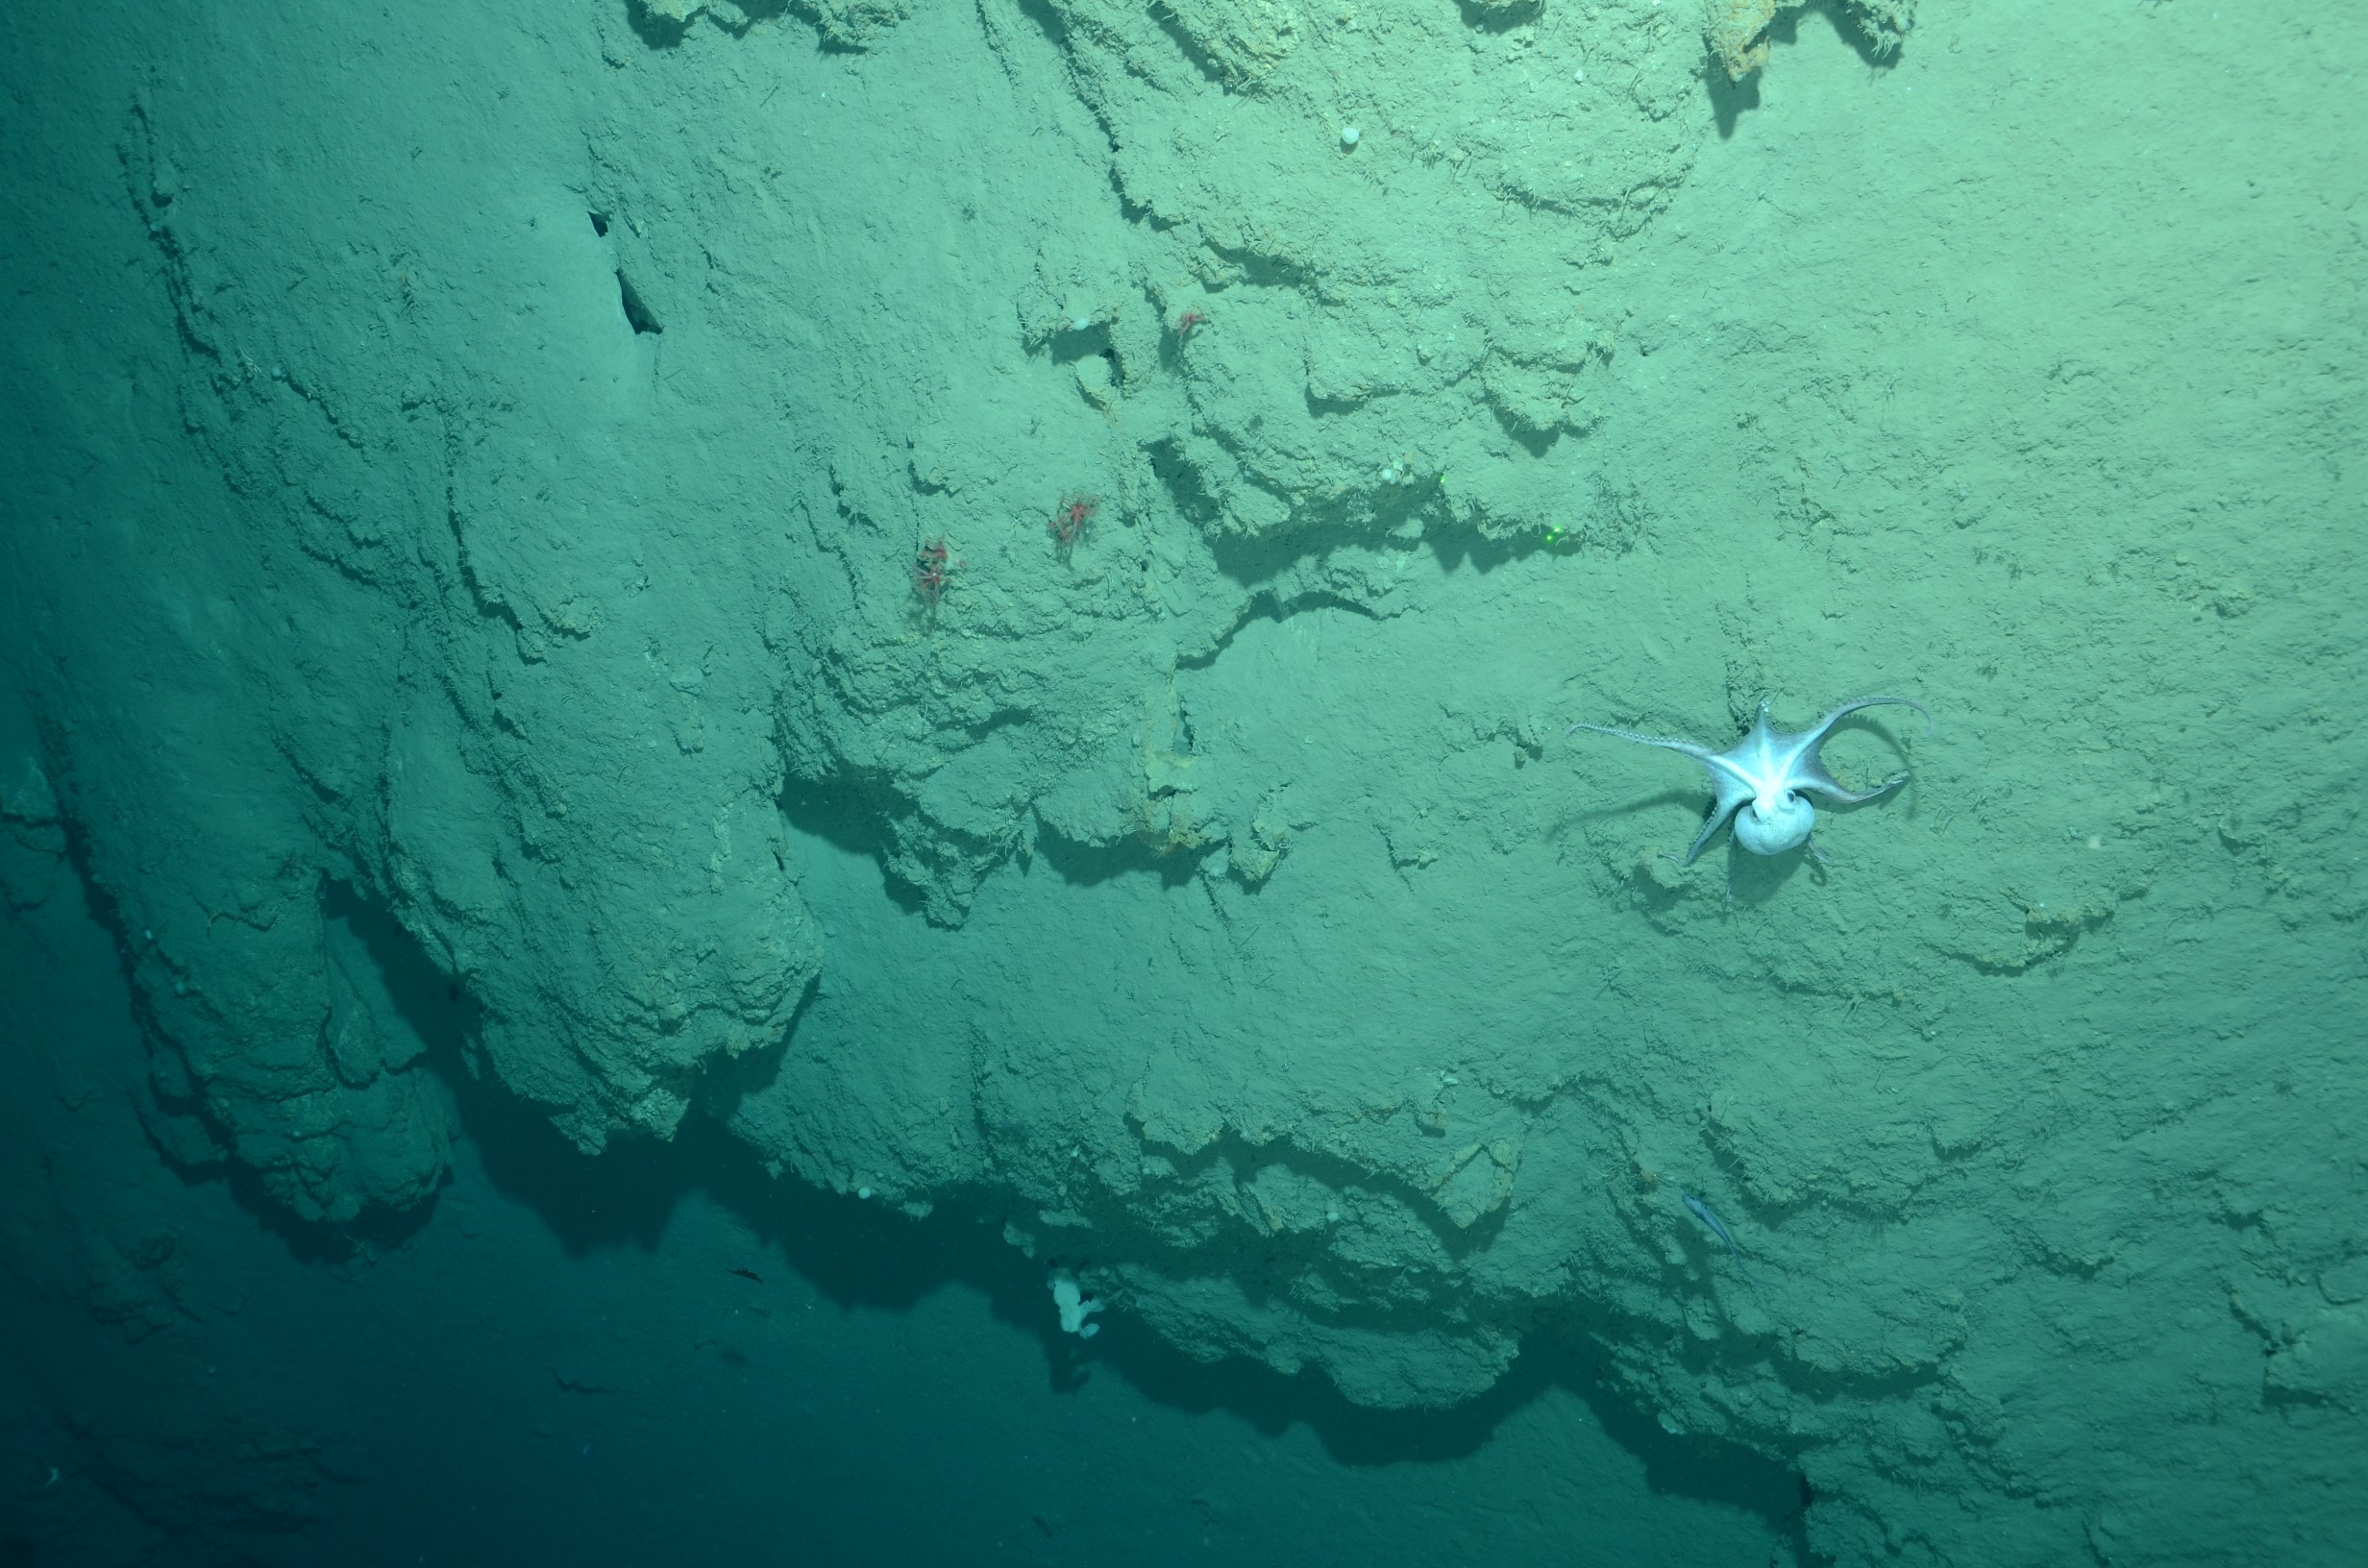 A benthic octopus moves along the seafloor in Wilmington Canyon